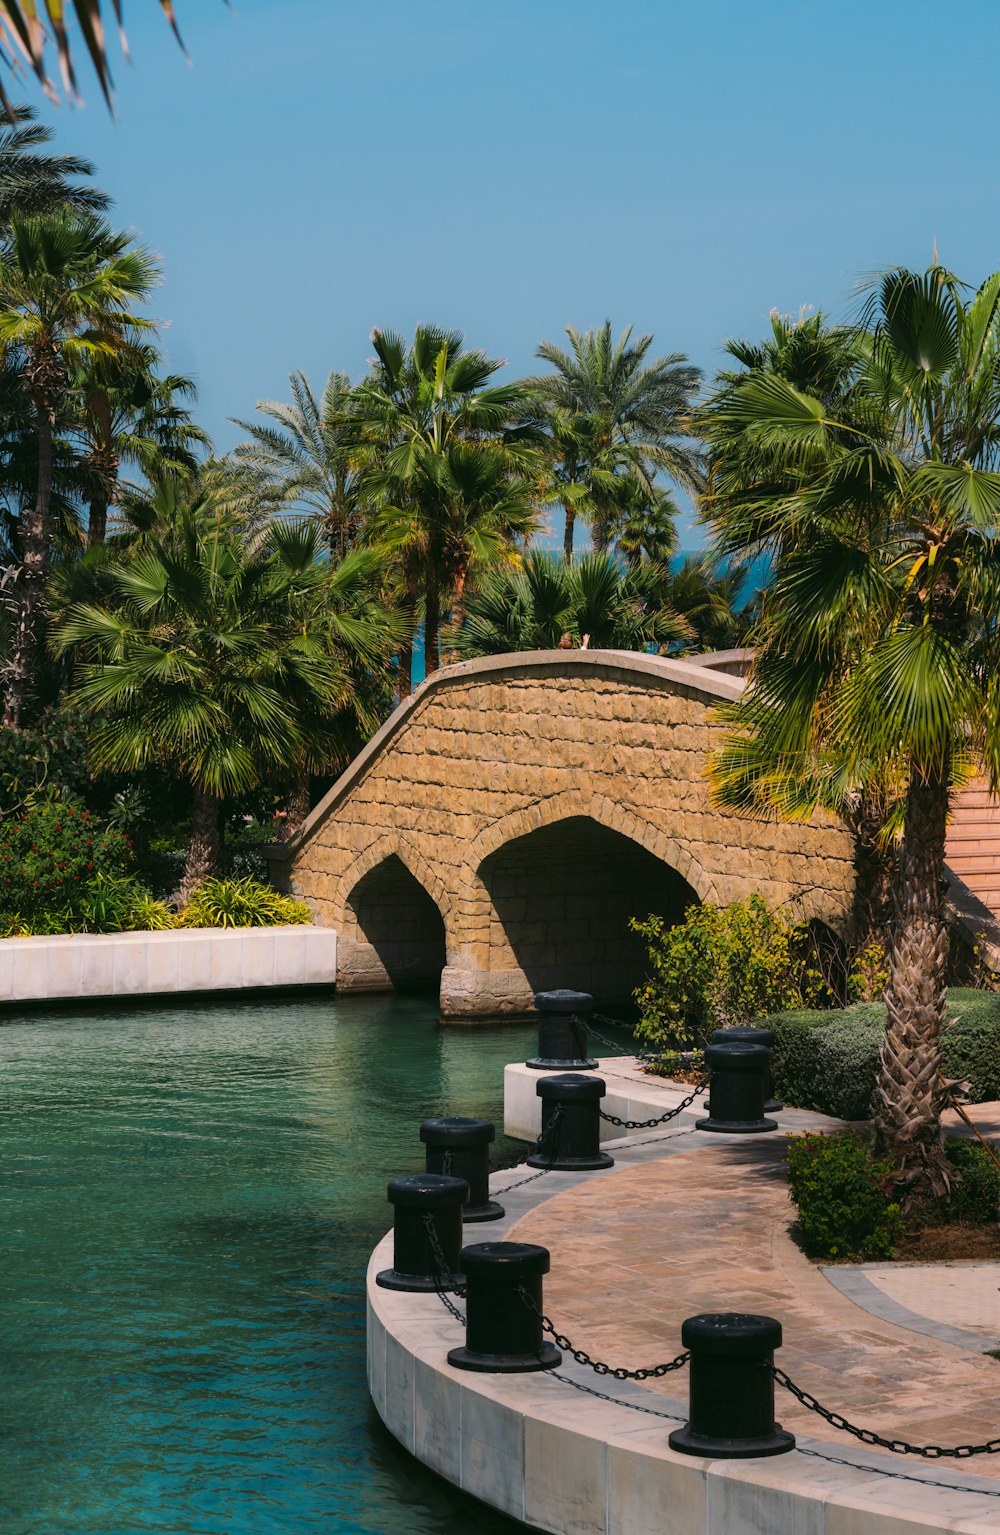 a bridge over a body of water surrounded by palm trees